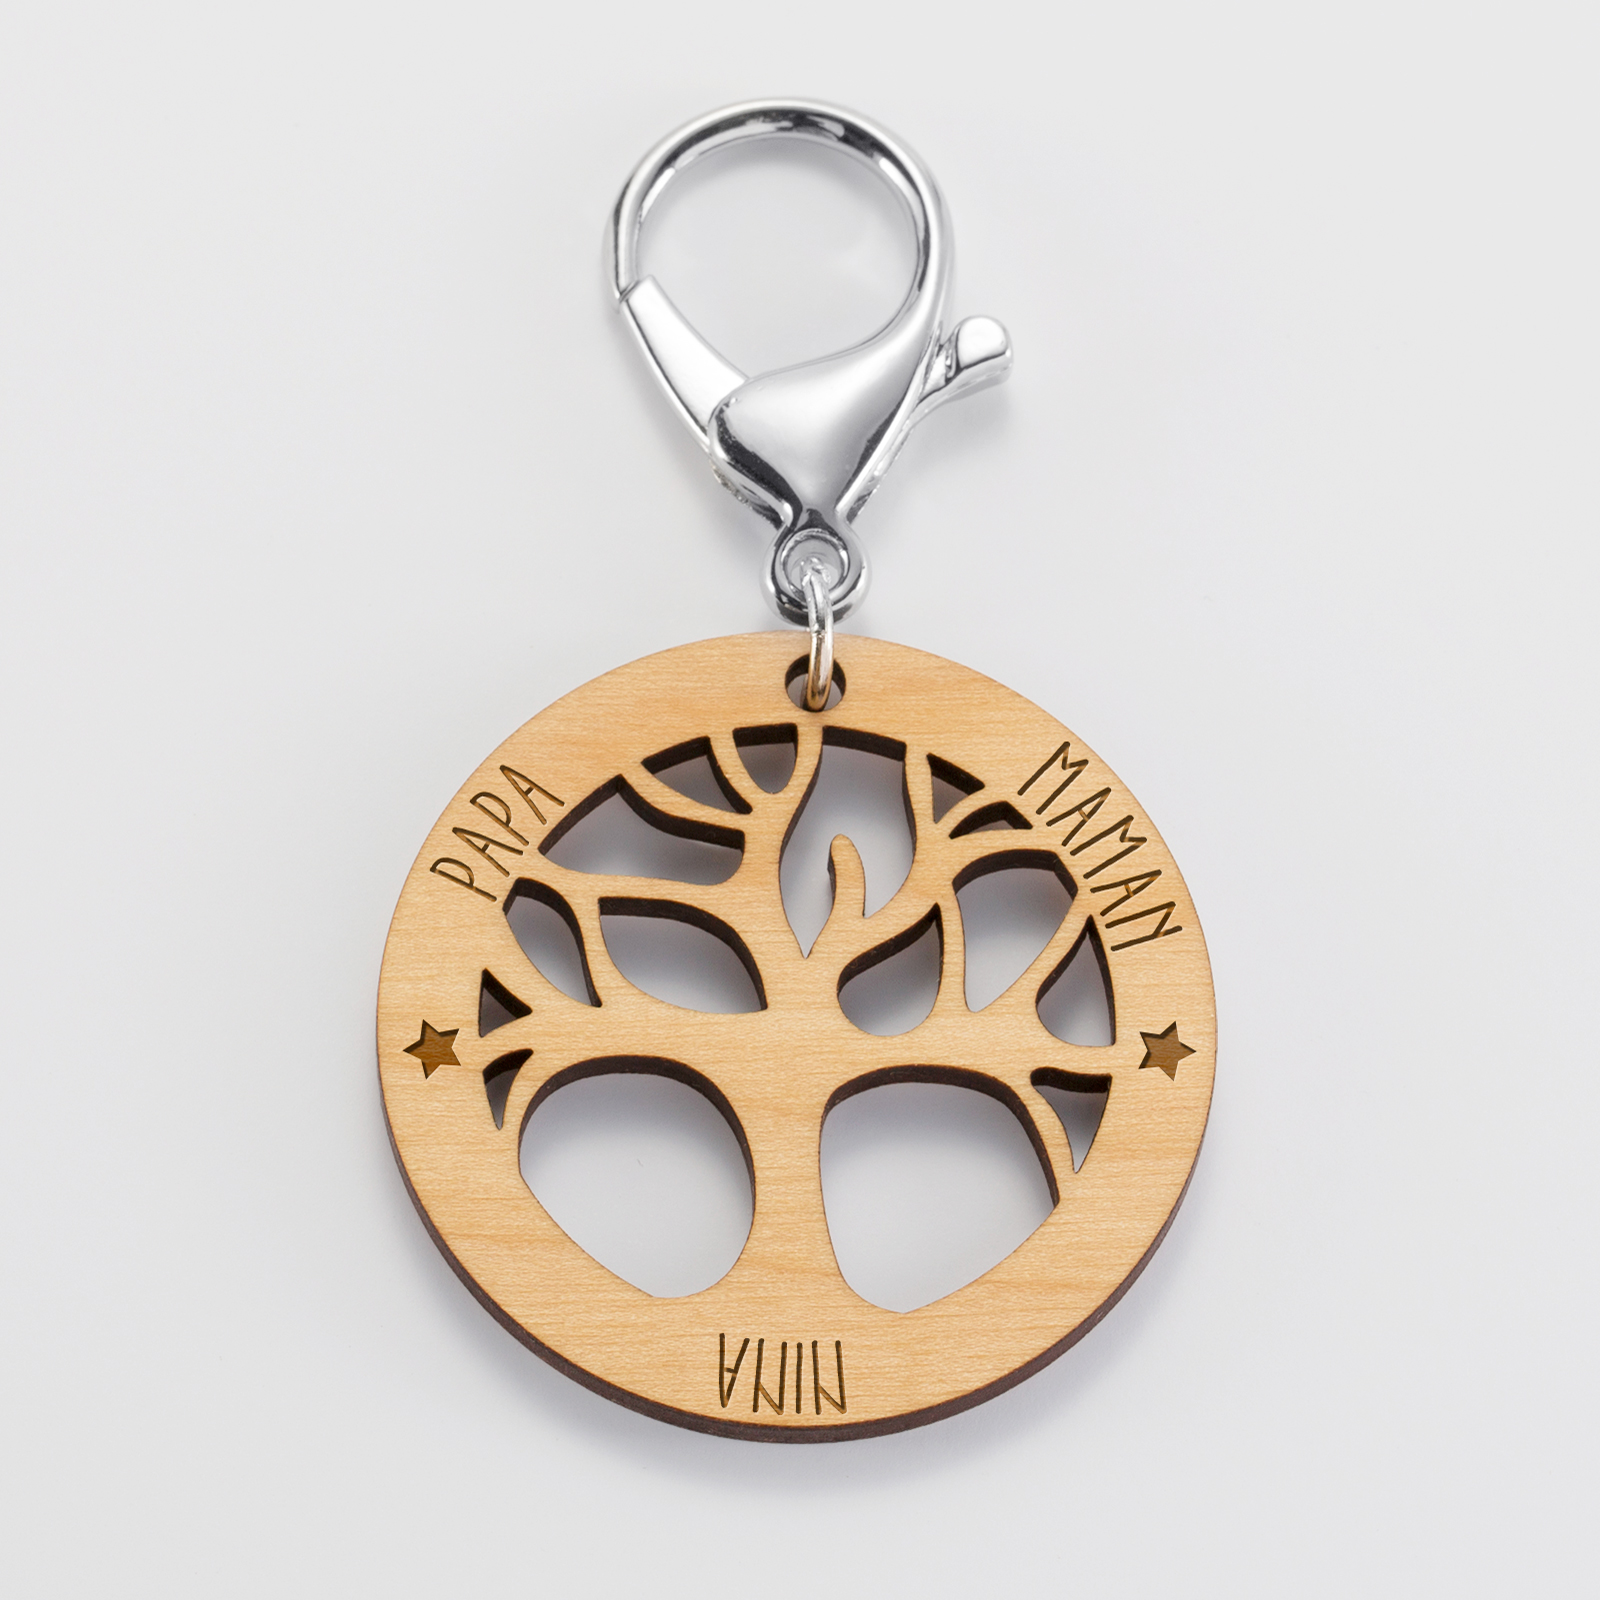 Personalised engraved tree of life wooden medallion keyring 50 mm